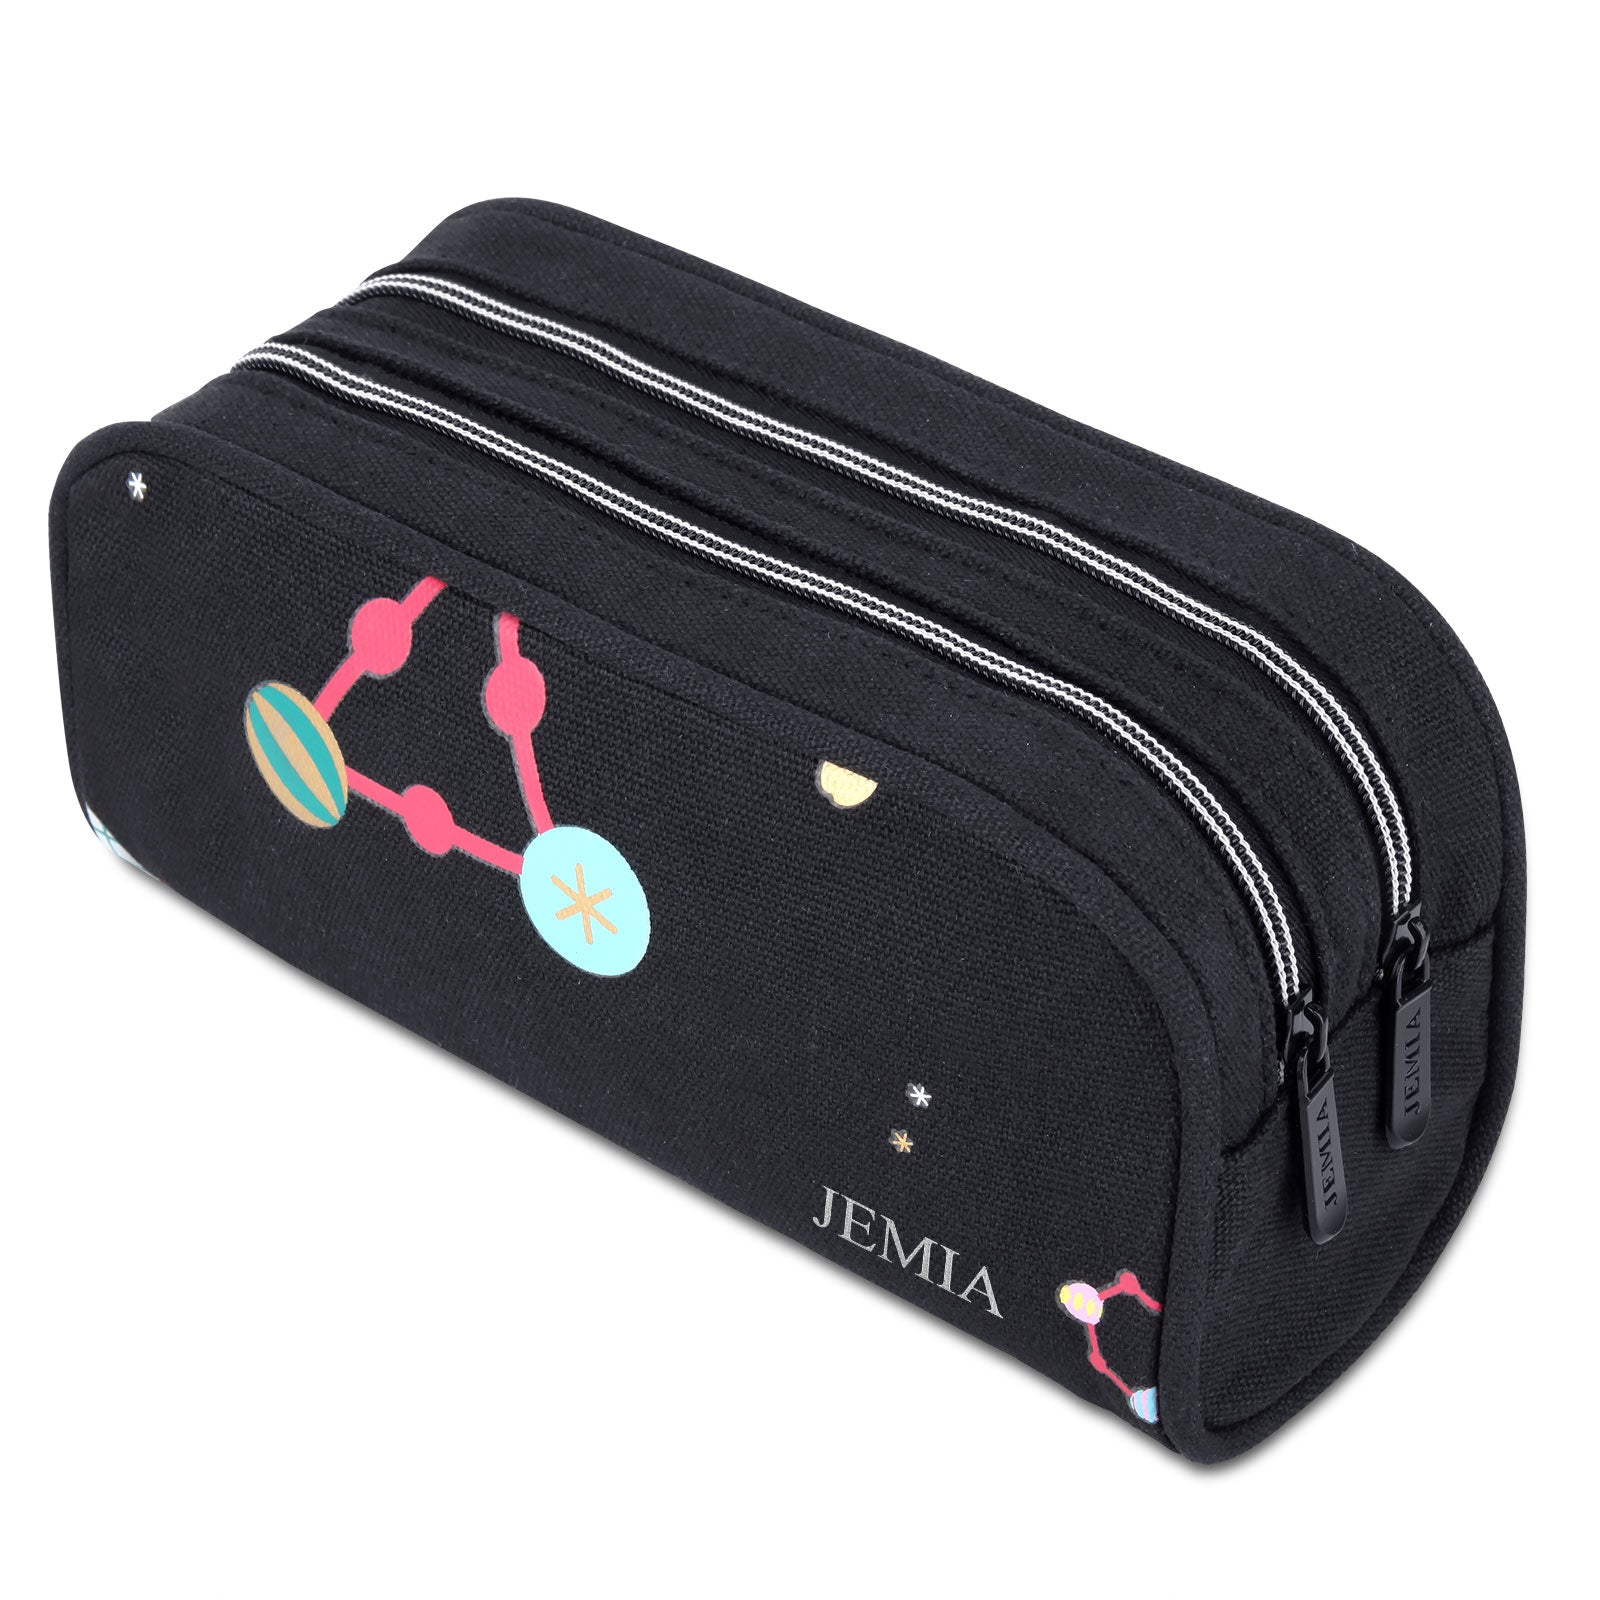 Dual Compartments Pencil Case with Mesh Pockets (Canvas) - JEMIA